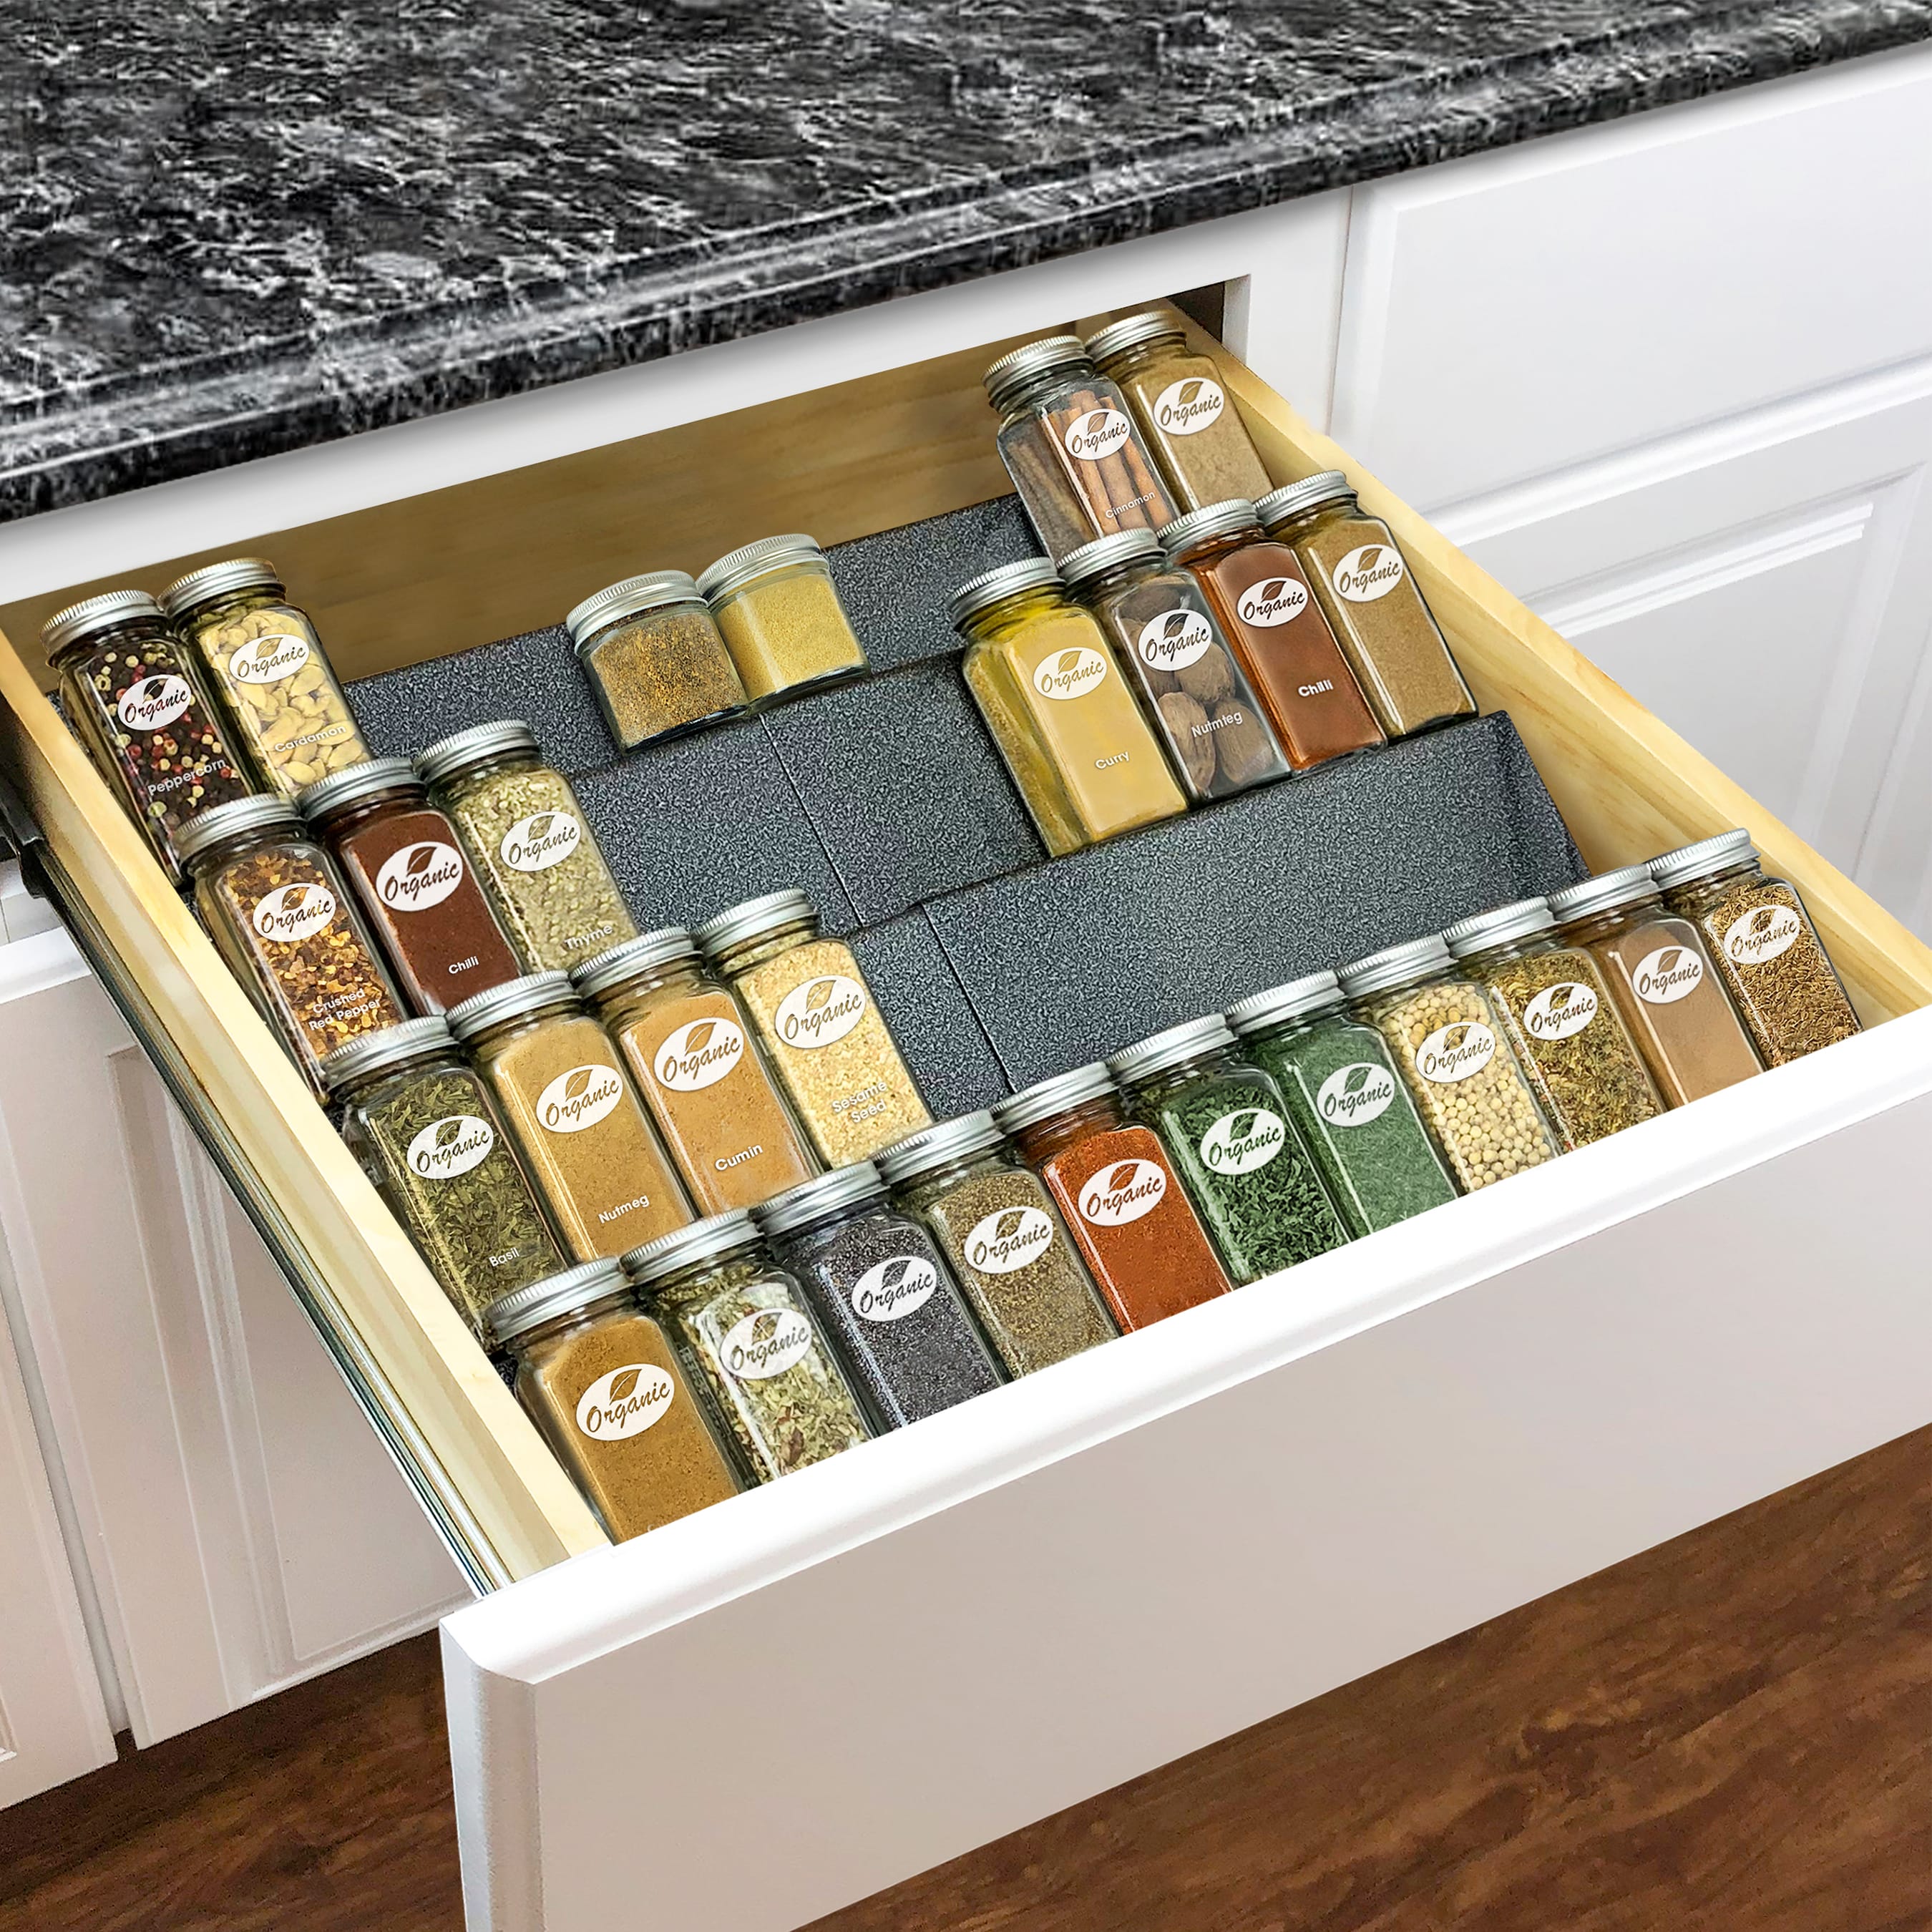 19 x 13 Inches Spice Drawer Organizer, 4 Tier Clear Acrylic Expandable  In-Drawer Seasoning Jars Rack, Kitchen Drawer Spice Insert Tray for